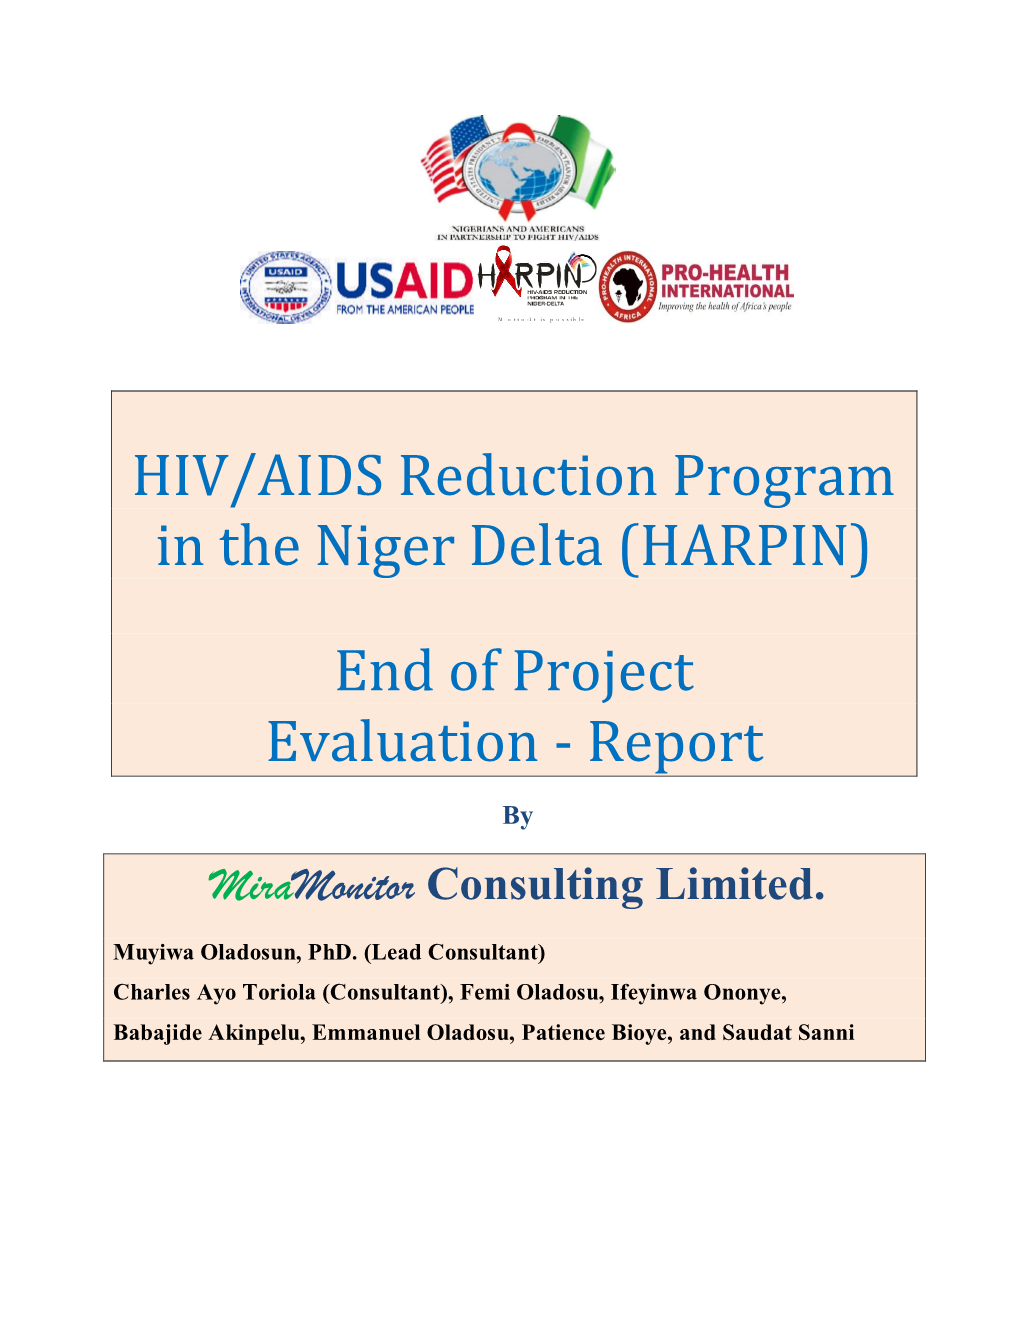 HIV/AIDS Reduction Program in the Niger Delta (HARPIN) End of Project Evaluation